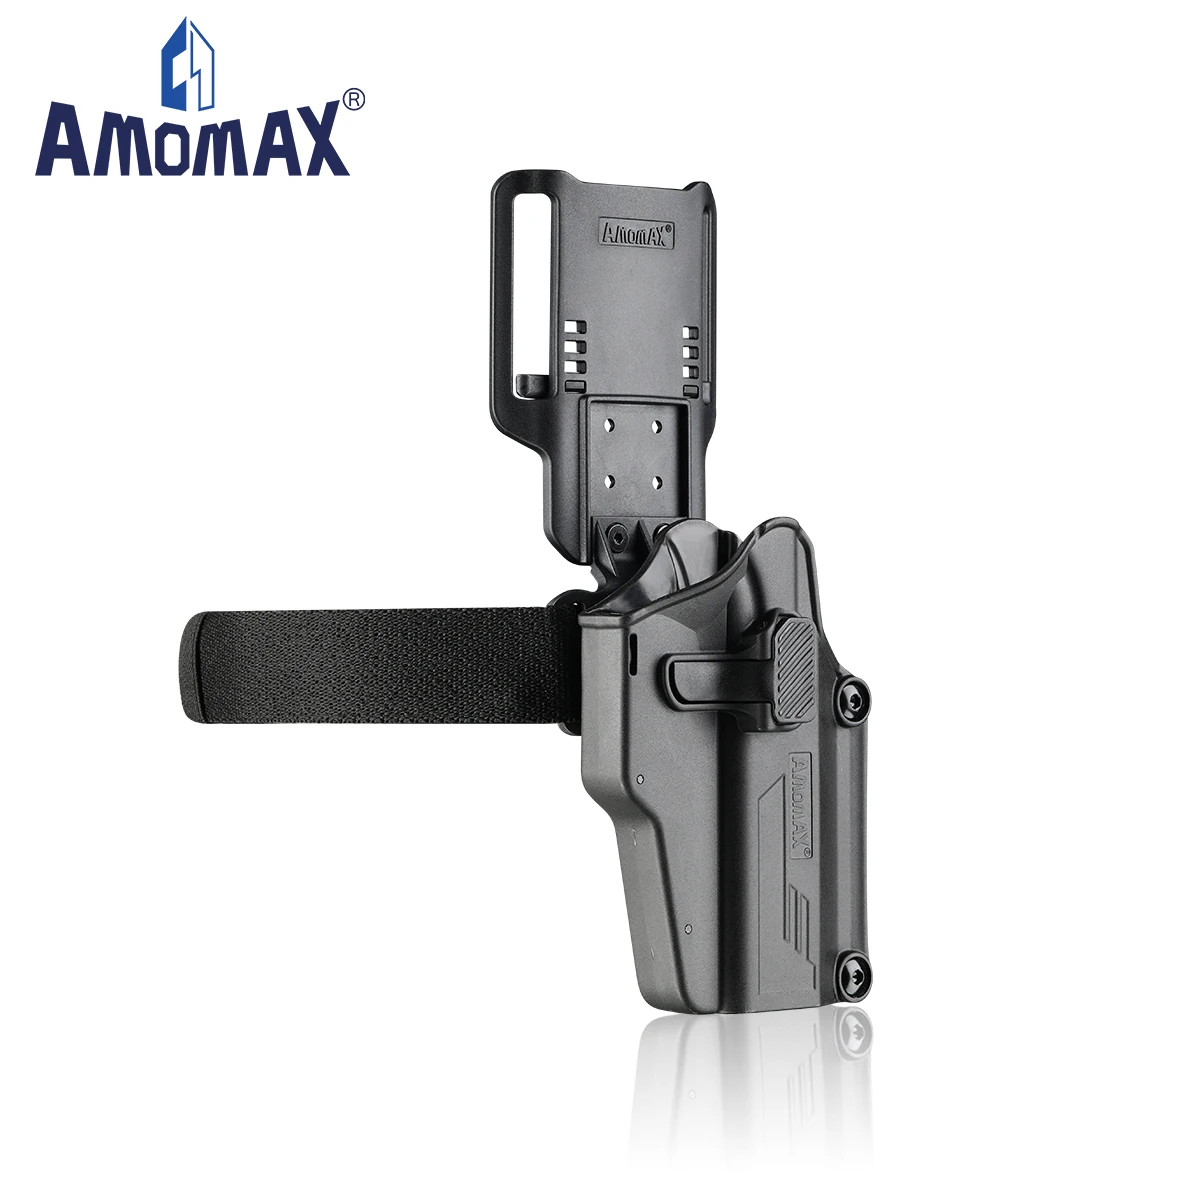 

Amomax Universal Gun Holster with Drop Leg Combo Fits 100+ Model Firearm Gun Case Airsoft Acessories for 1911 Glock Pistols